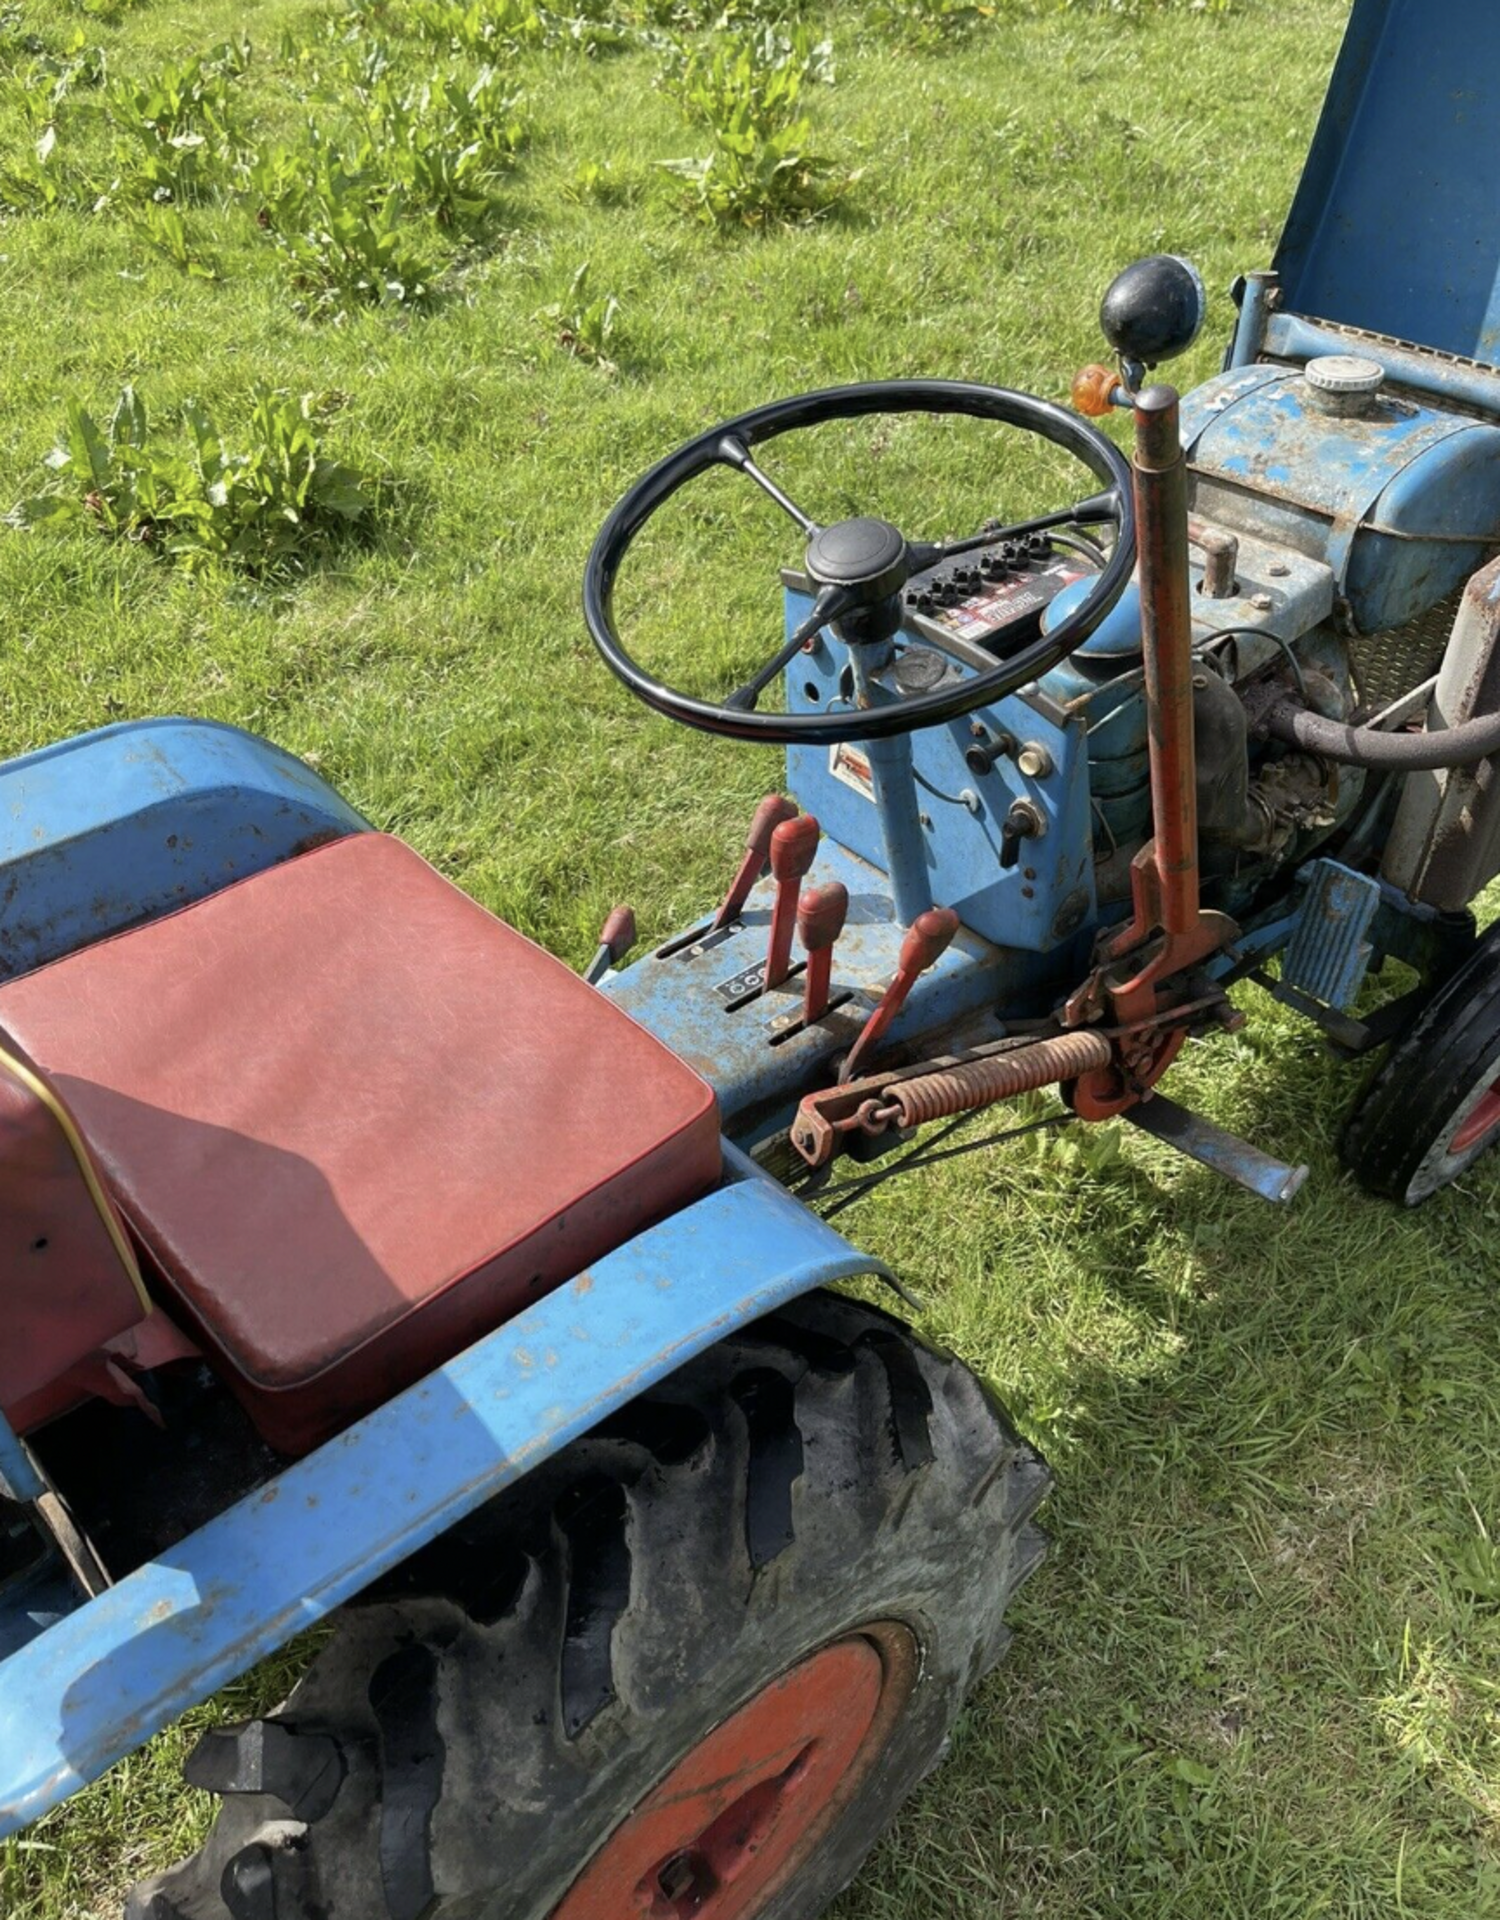 Gutbrod tractor and rotavator - Image 7 of 10